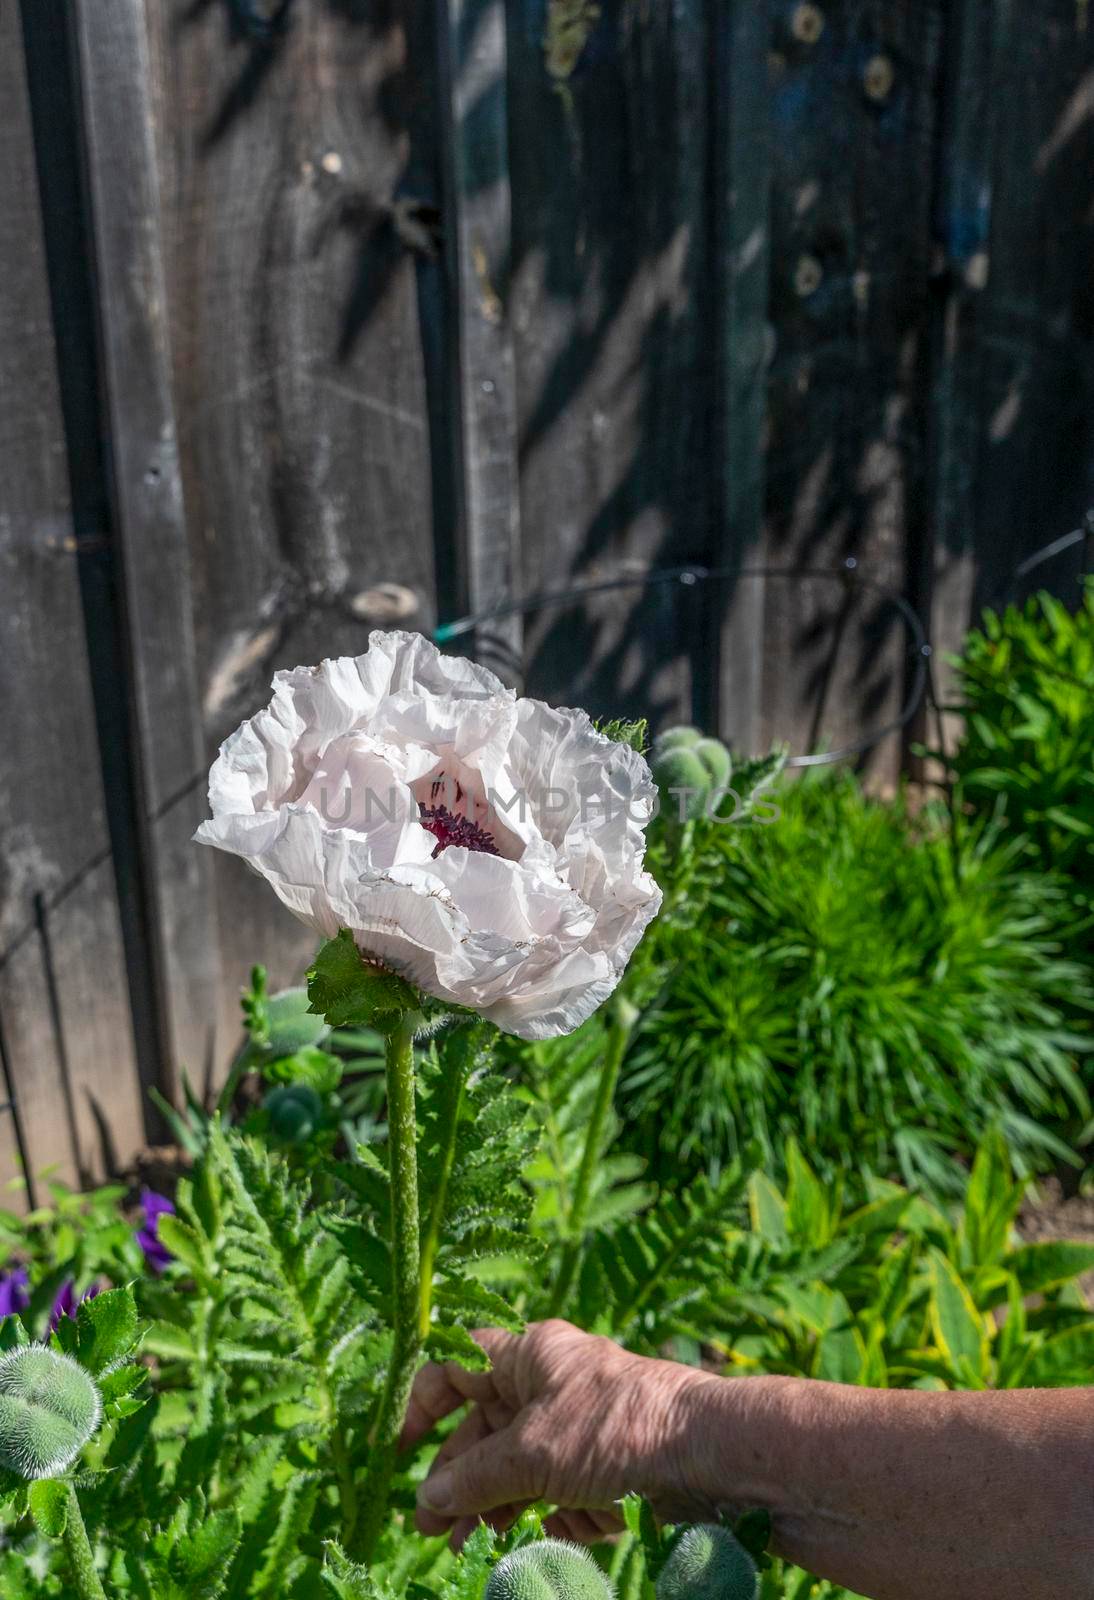 Hand holds a white poppy by the stem, examining a flower near